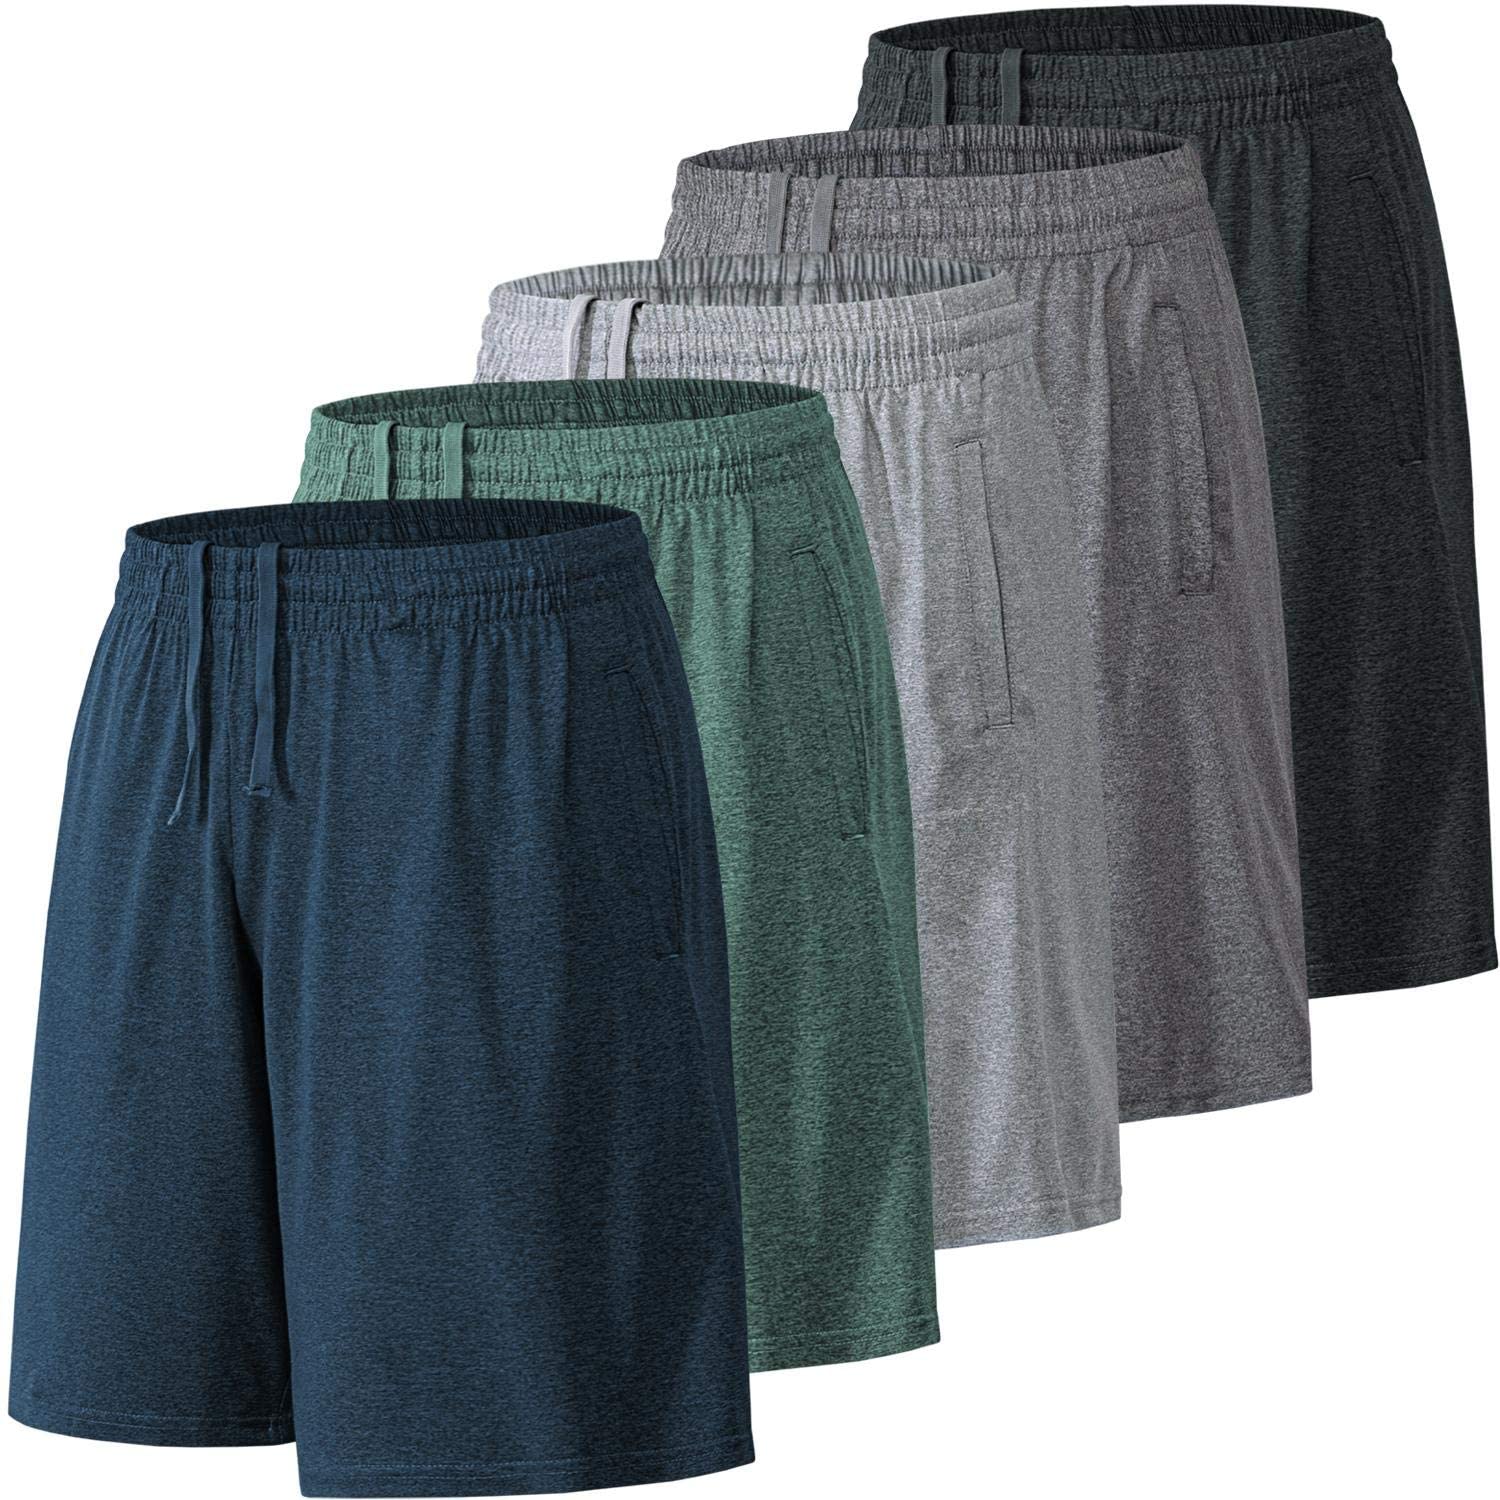 BALENNZ Athletic Shorts for Men with Pockets and Elastic